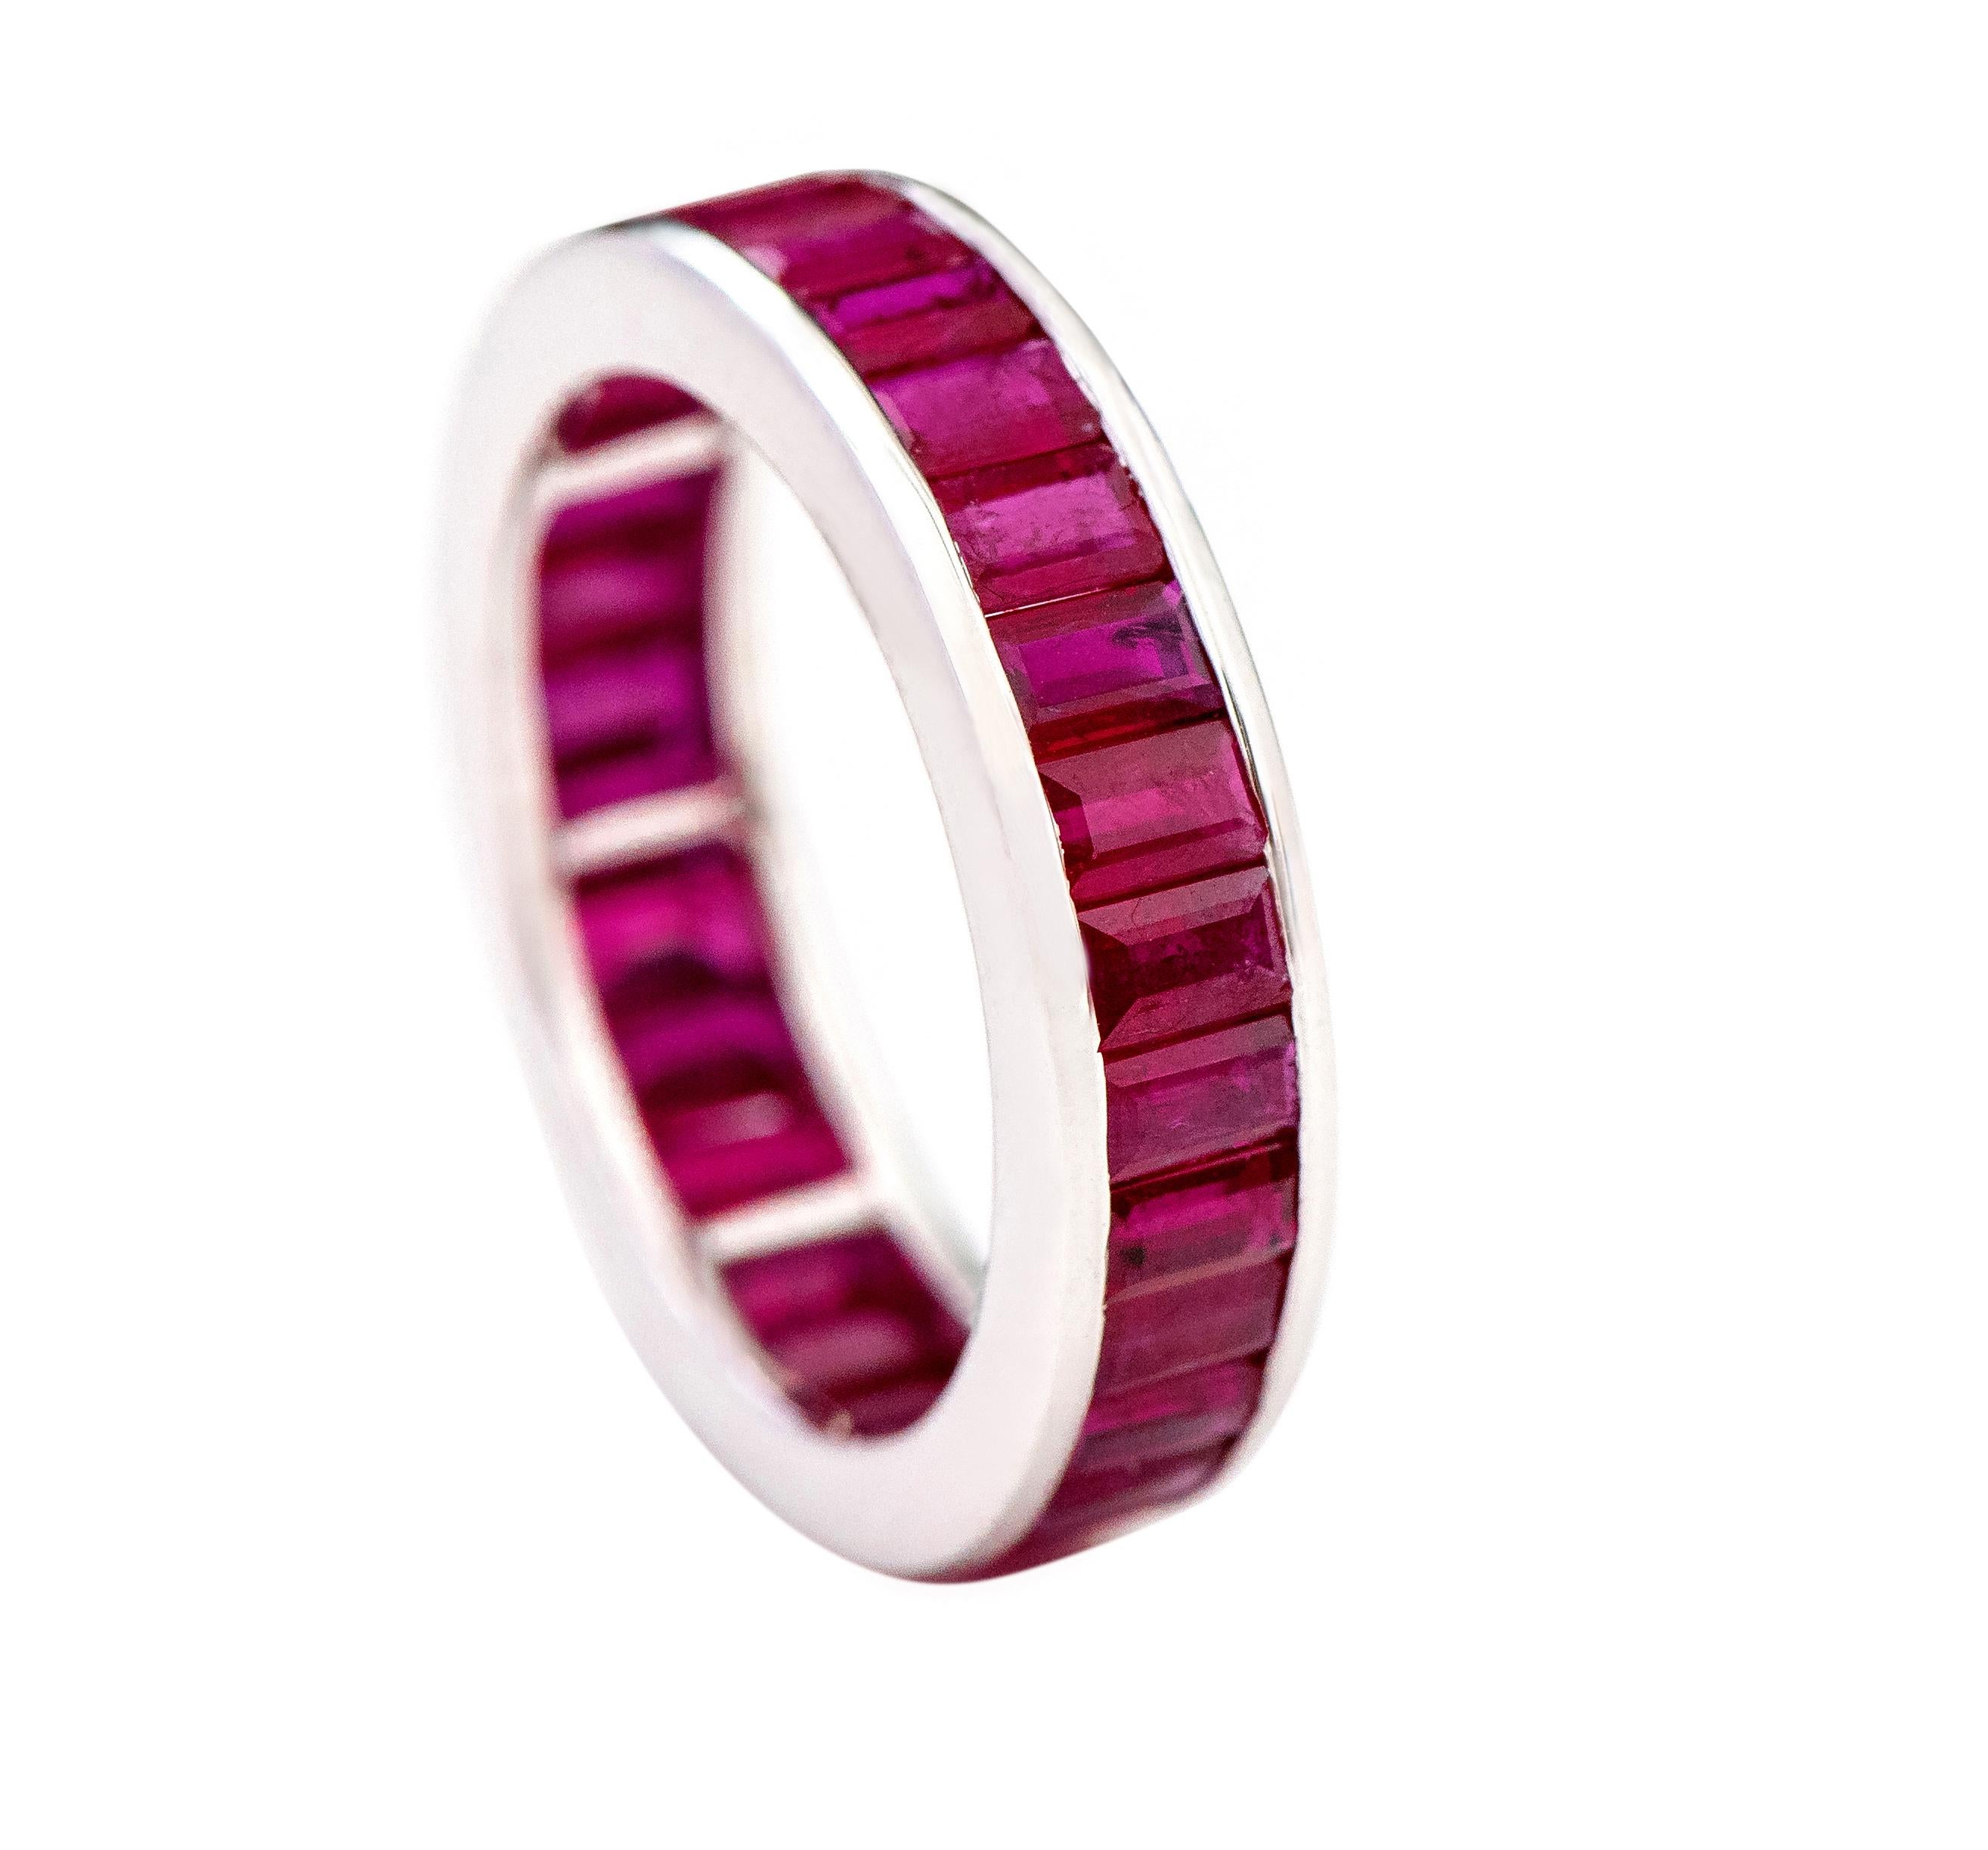 18 Karat White Gold 5.46 Carat Baguette-Cut Ruby Eternity Band Ring

This elegant vibrant red ruby band is a class apart. The buyer’s choice as it stands for an astoundingly perfect cut of baguette-cut rubies embellished in the enclosed solid white